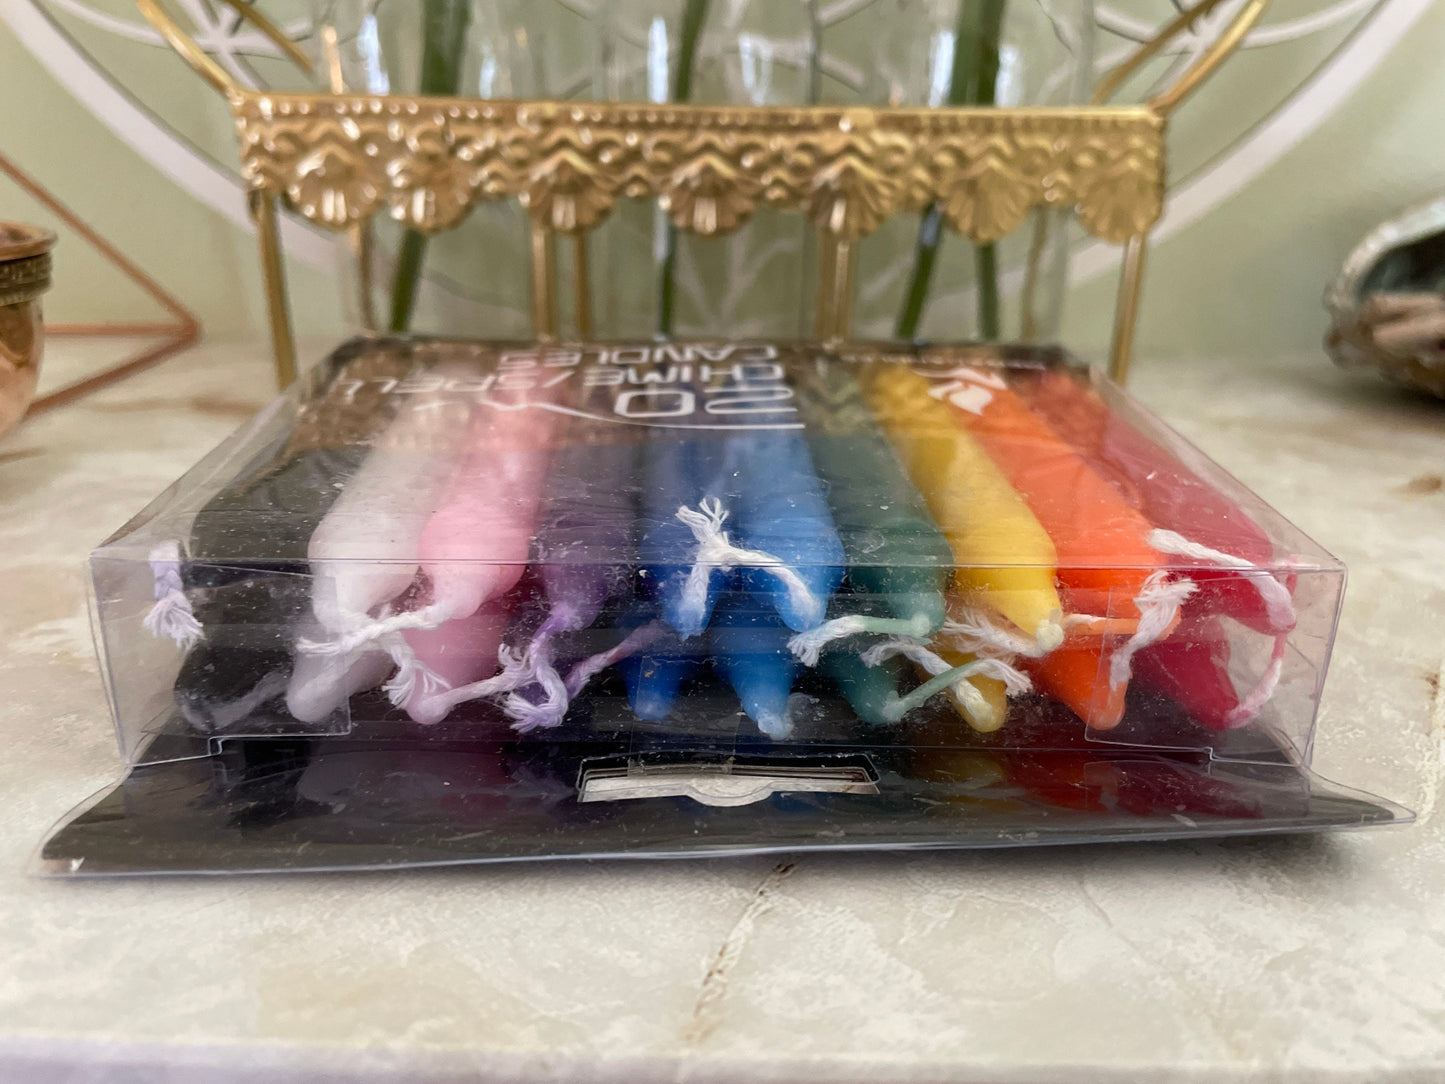 CHIME Set of 20 piece 4” ritual candles